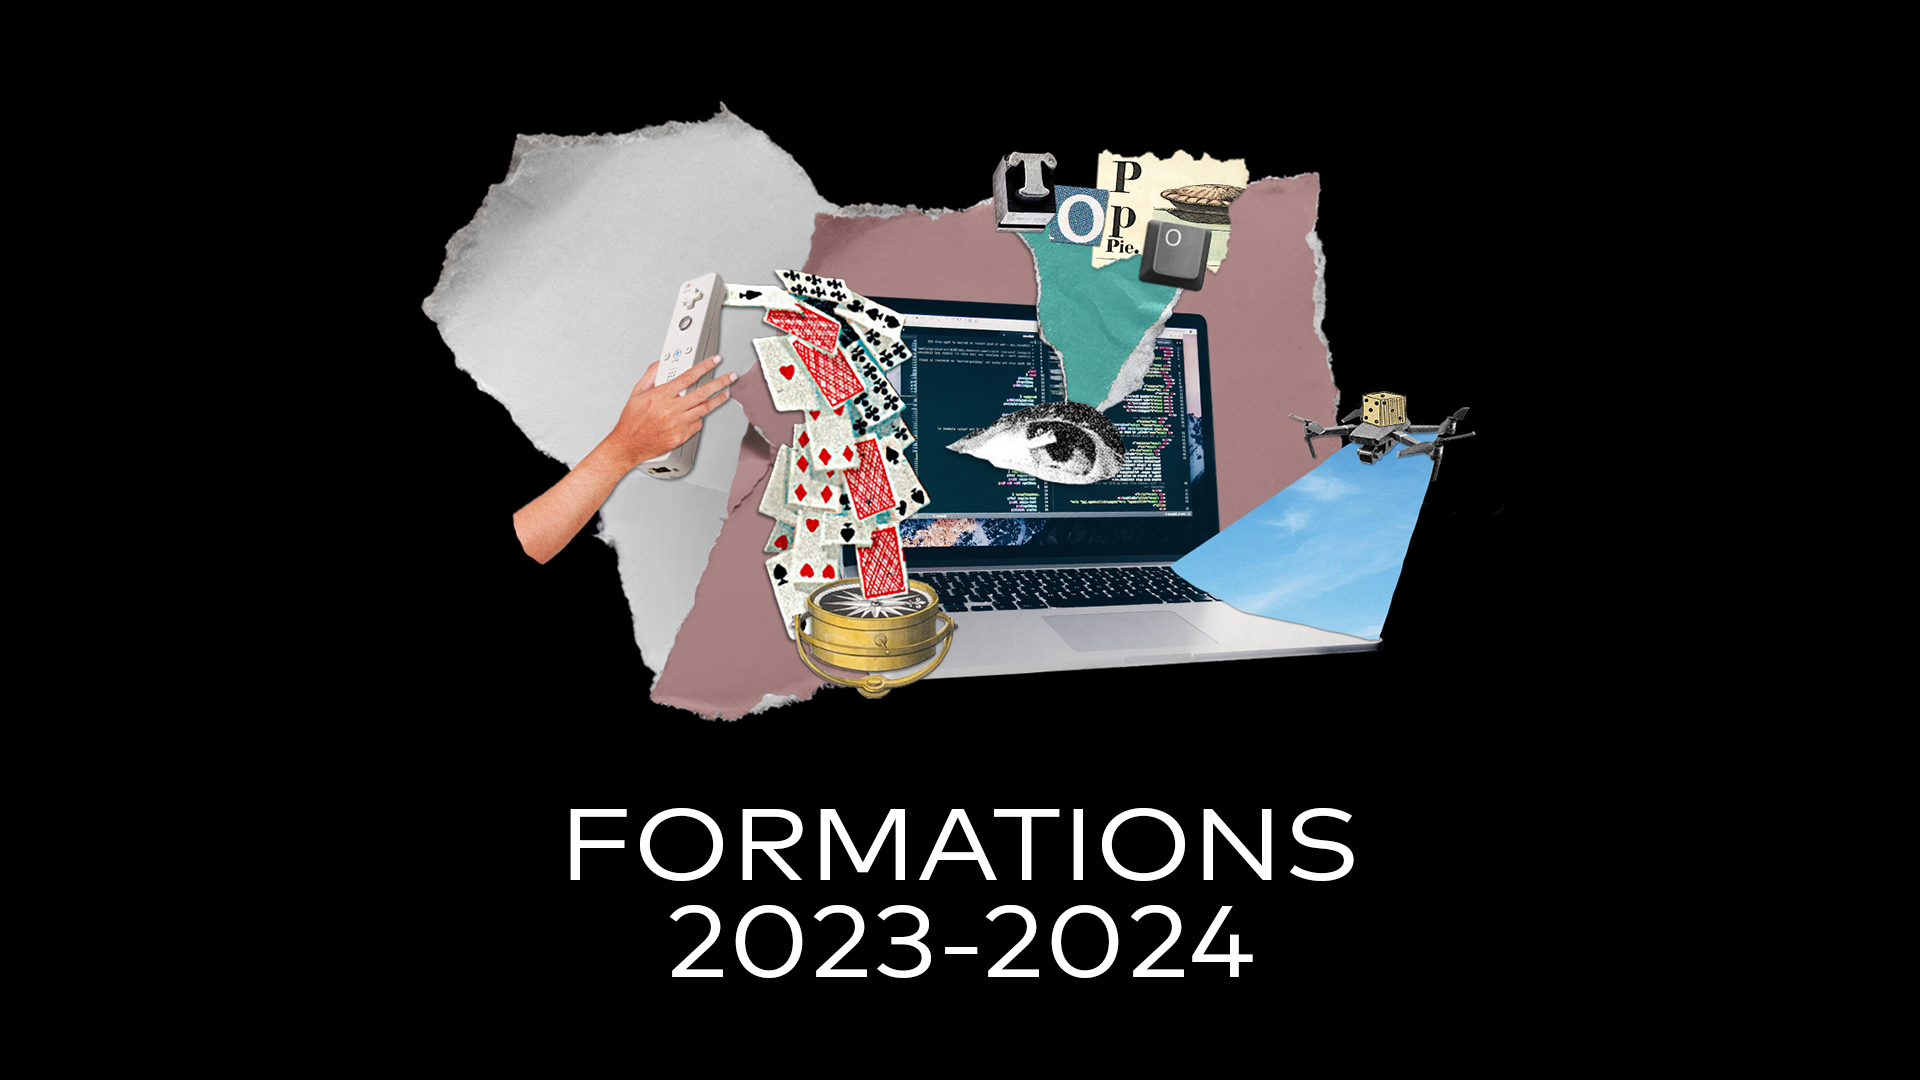 Formation 2023-2024